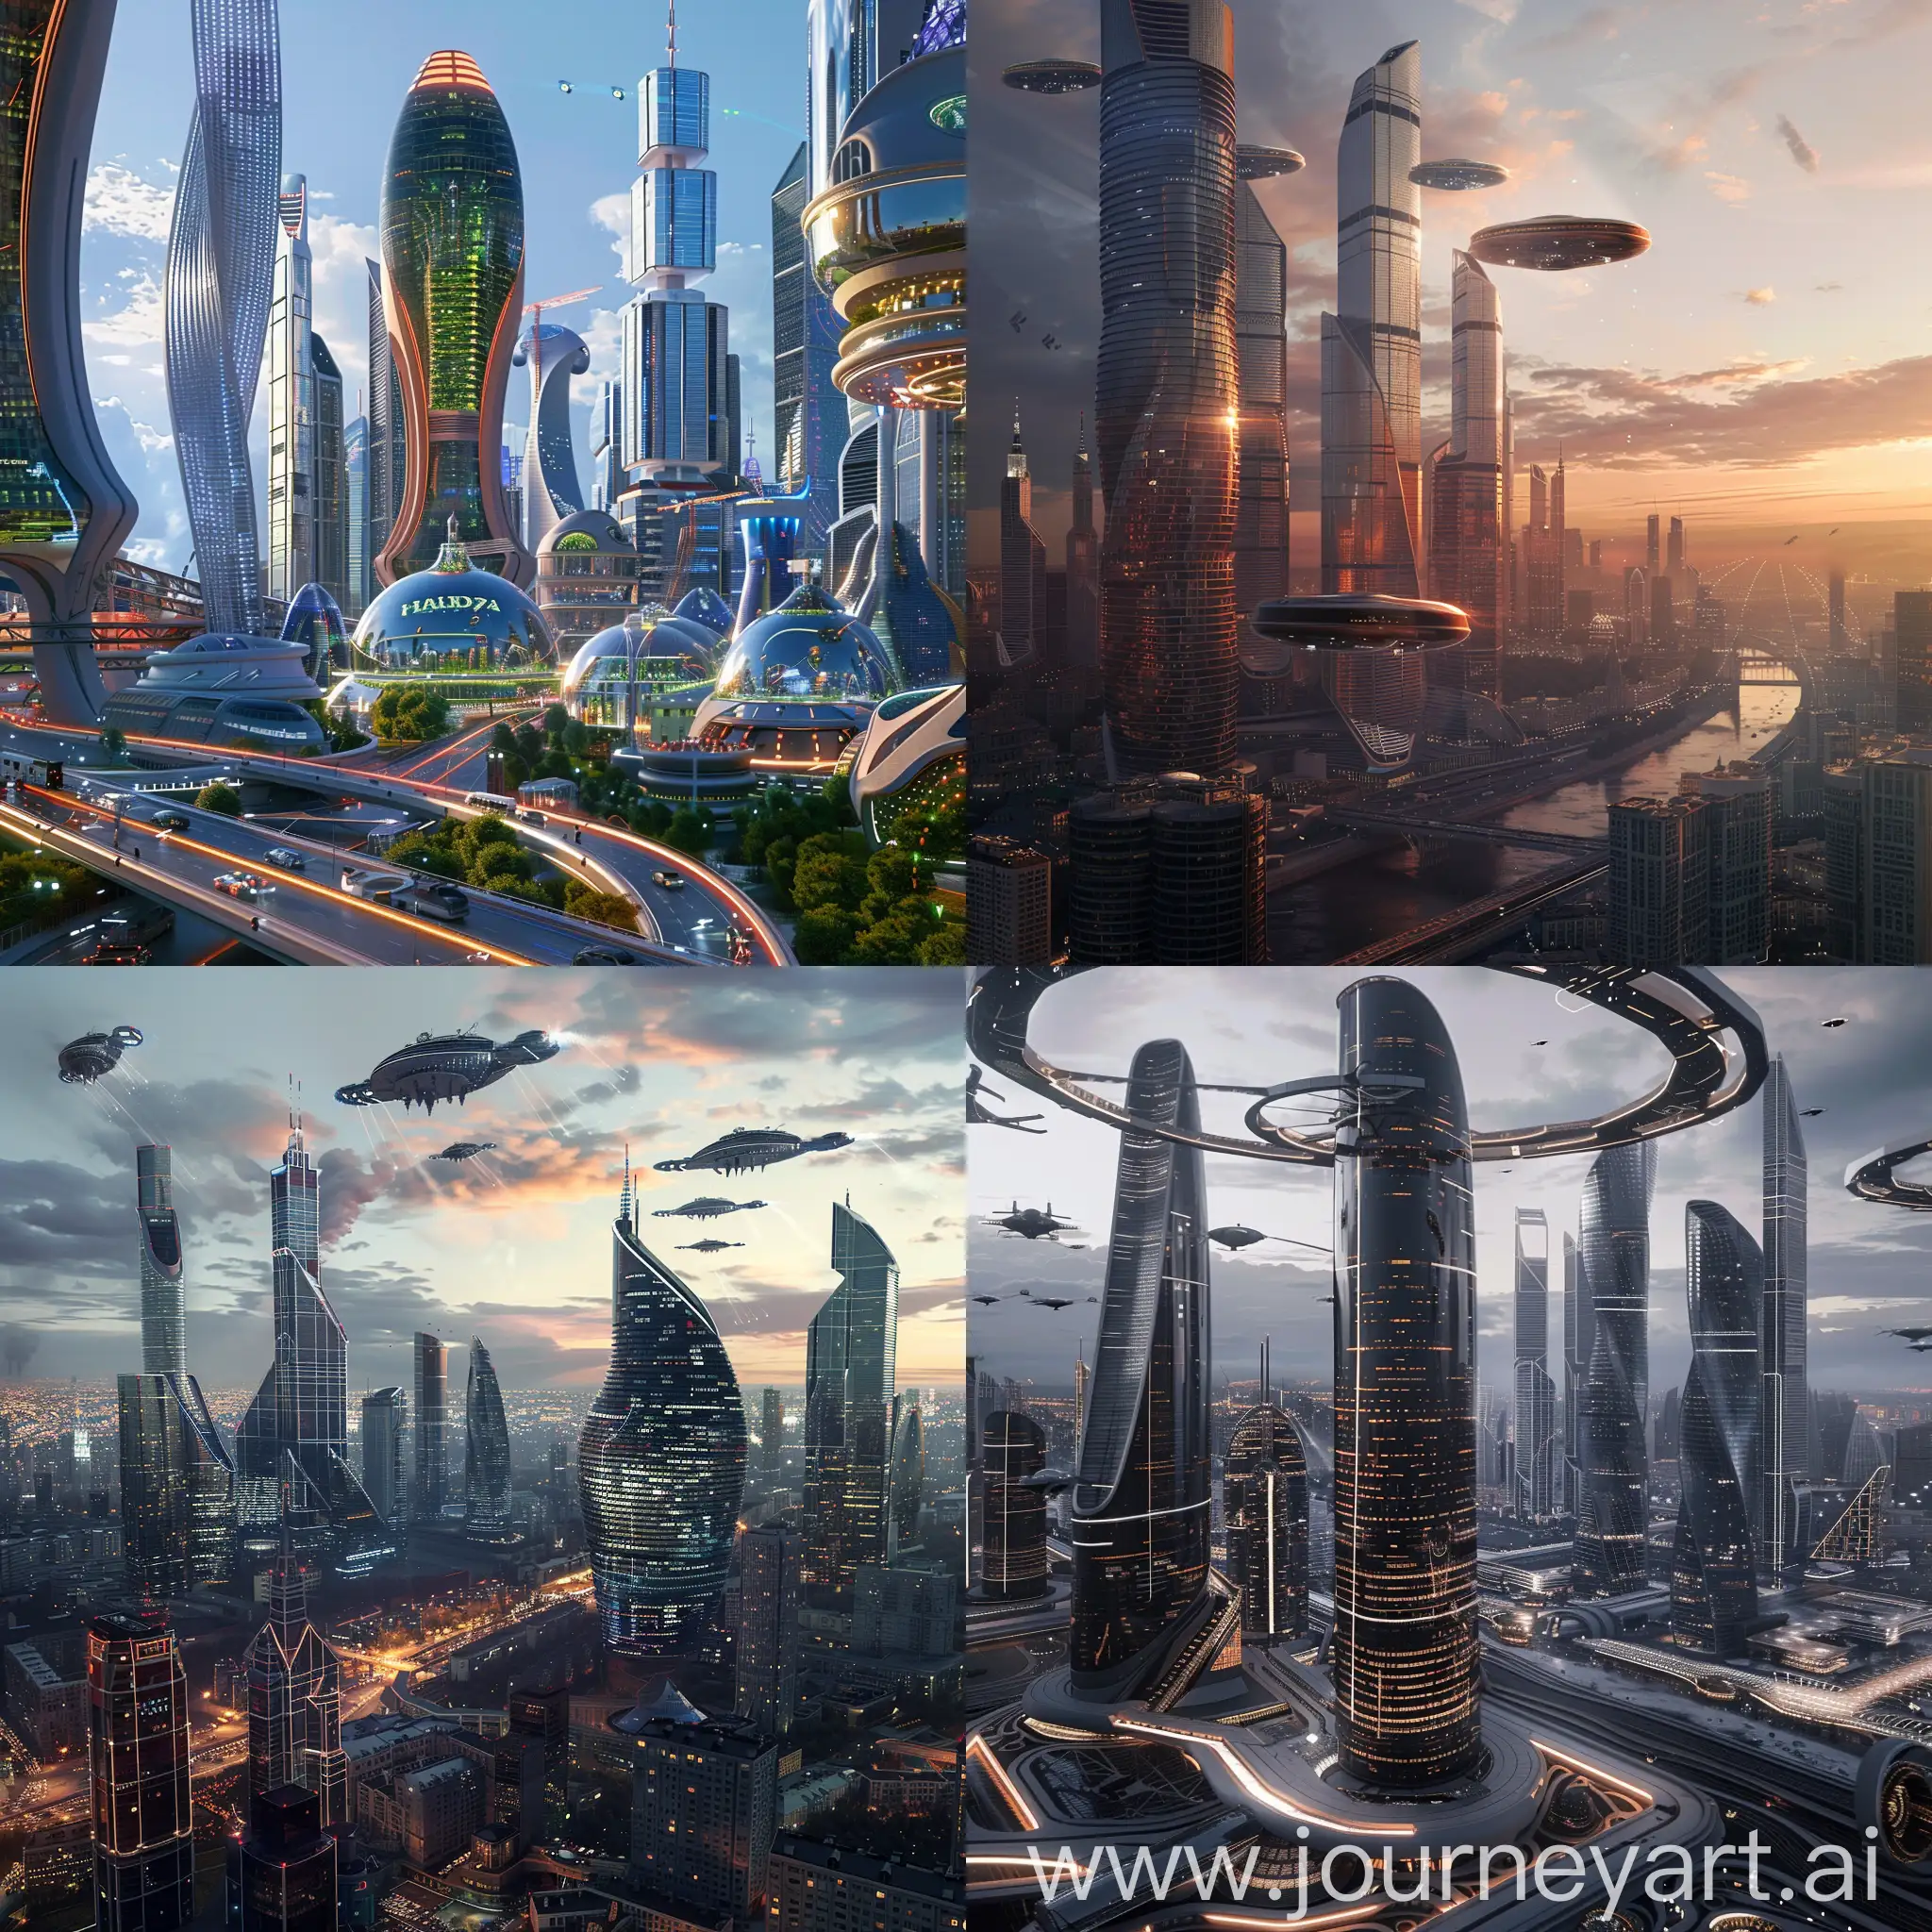 Sci-Fi Moscow, Advanced Science and Technology, Advanced, Smart Grids, Vertical Farms. Hyperloop Transit, AI Governance, Augmented Reality Navigation, Autonomous Vehicles, 3D Printed Buildings, Quantum Computing Hubs, Robotic Maintenance, Neural Interface Zones, Interactive Facades, Drone Highways, Energy-Generating Pavements, Environmental Purification Towers, Smart Lighting, Public Space Pods, Climate Control Domes, Holographic Signage, Nano-Tech Inspired Surfaces, Self-Illuminating Buildings, In Unreal Engine 5 Style --stylize 1000